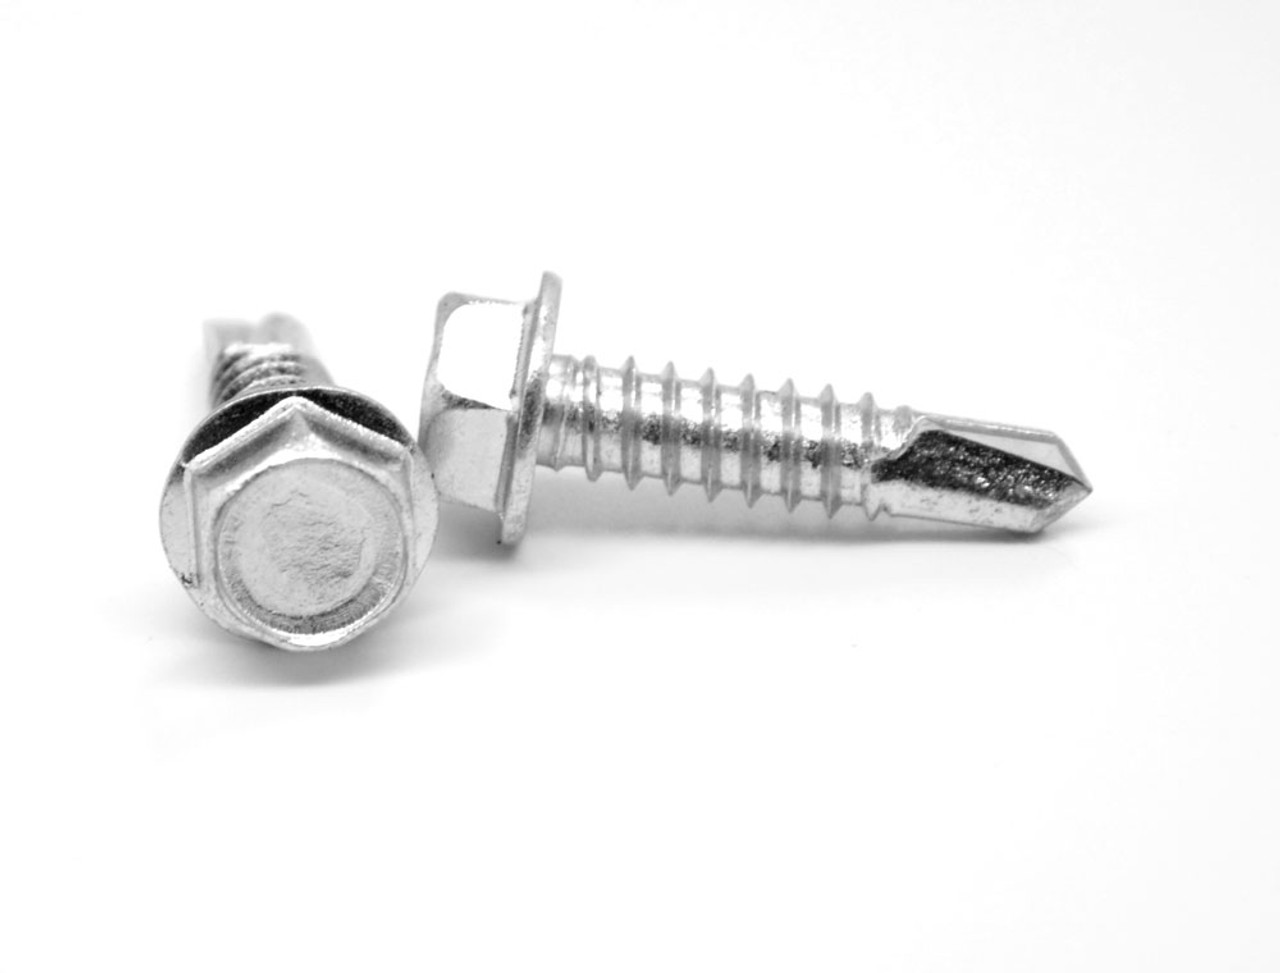 #7-19 x 1" (FT) Self Drilling Screw Hex Washer Head #2 Point Stainless Steel 410